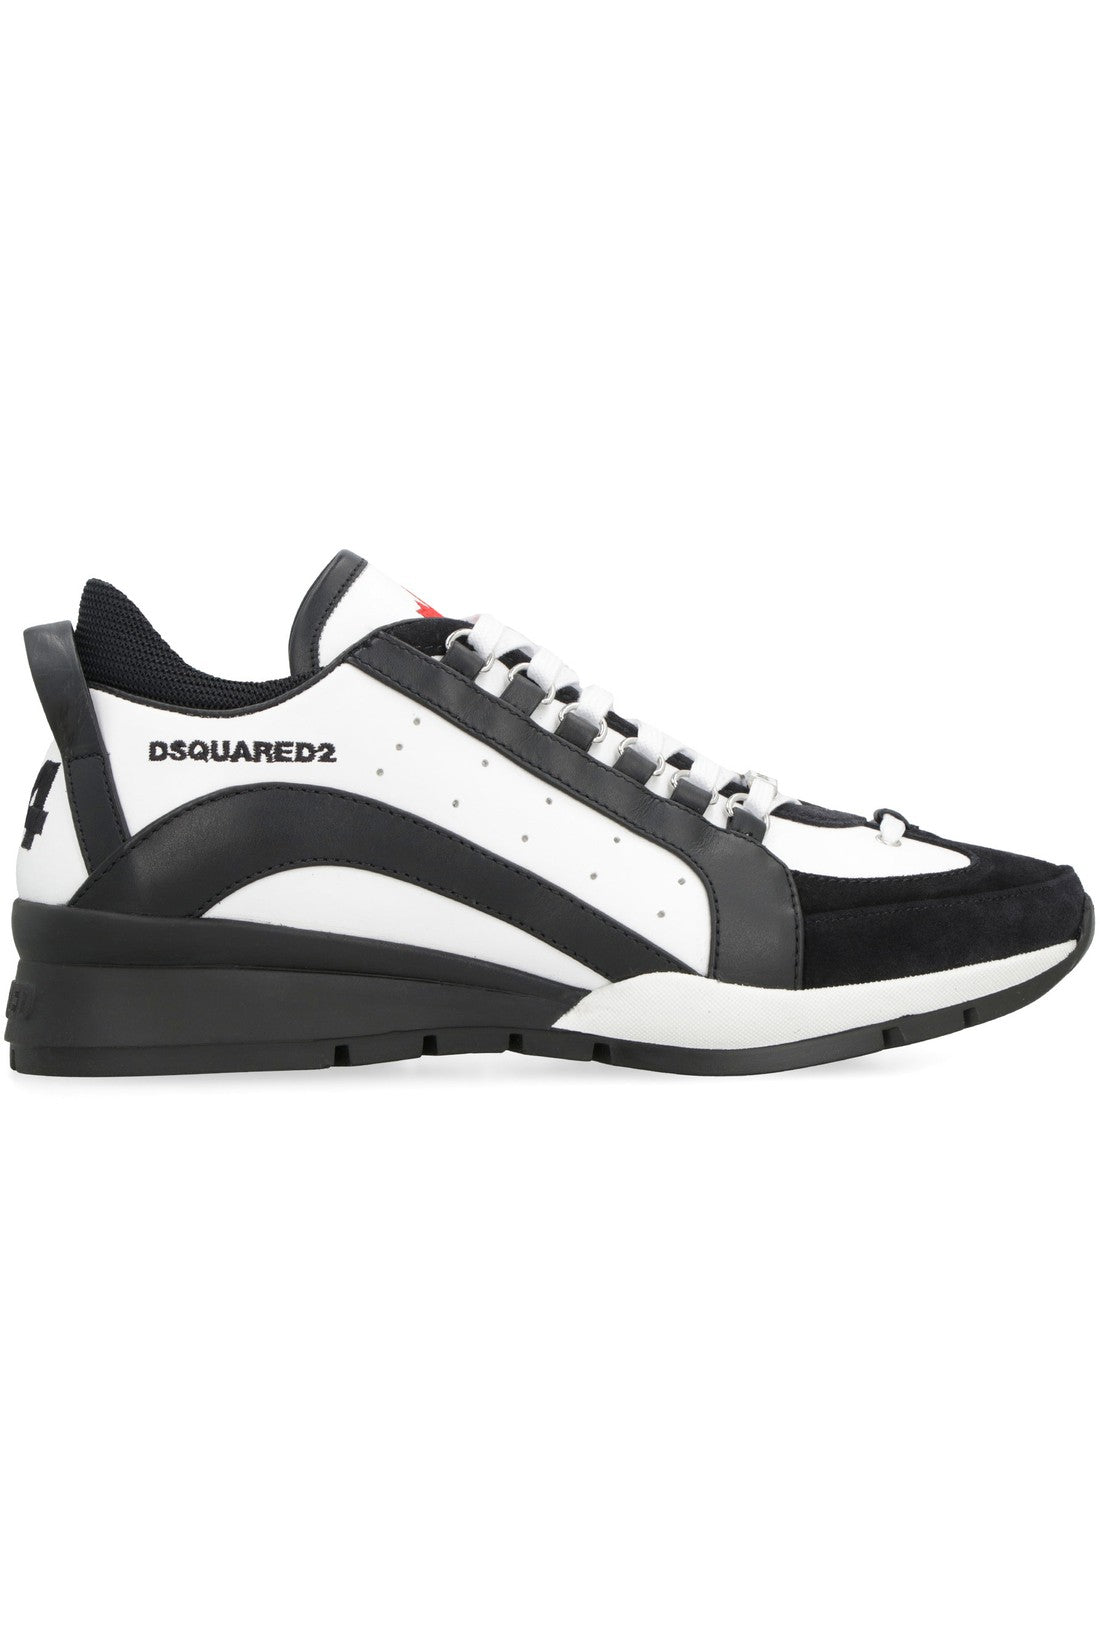 Dsquared2-OUTLET-SALE-Legendary leather low-top sneakers-ARCHIVIST